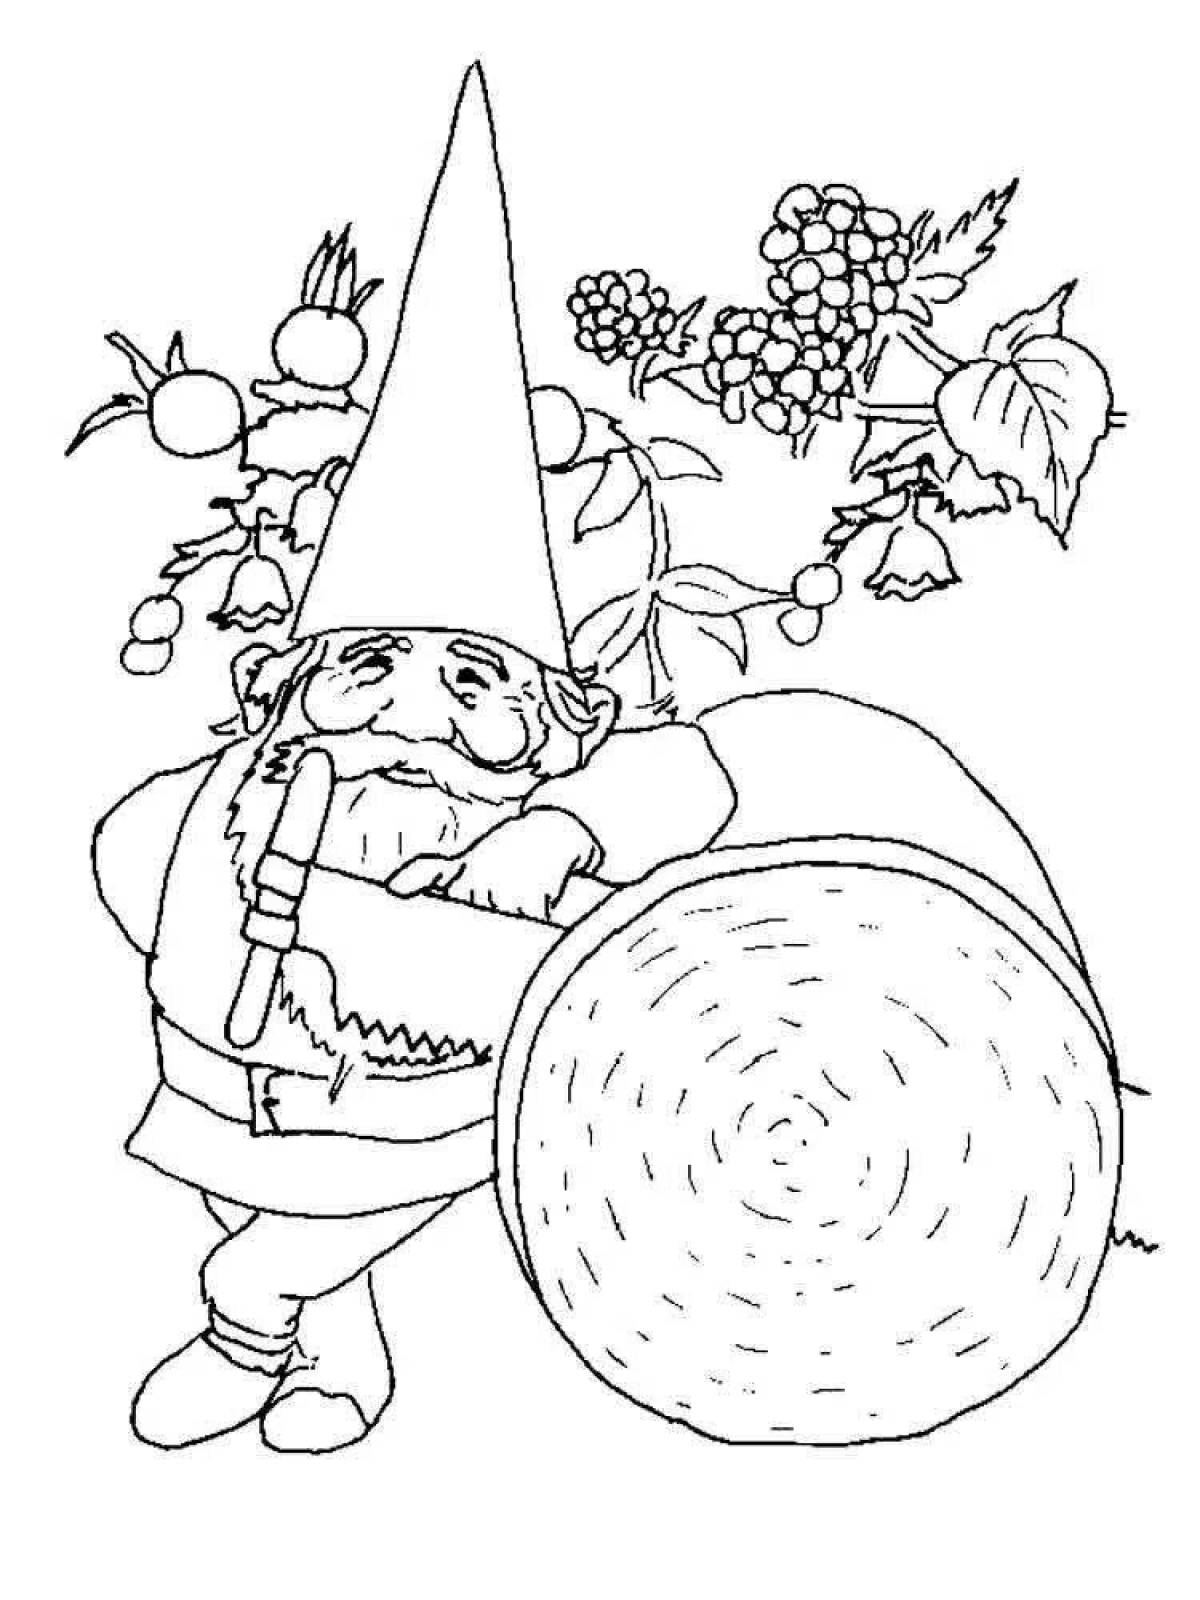 Colored Christmas gnome coloring book